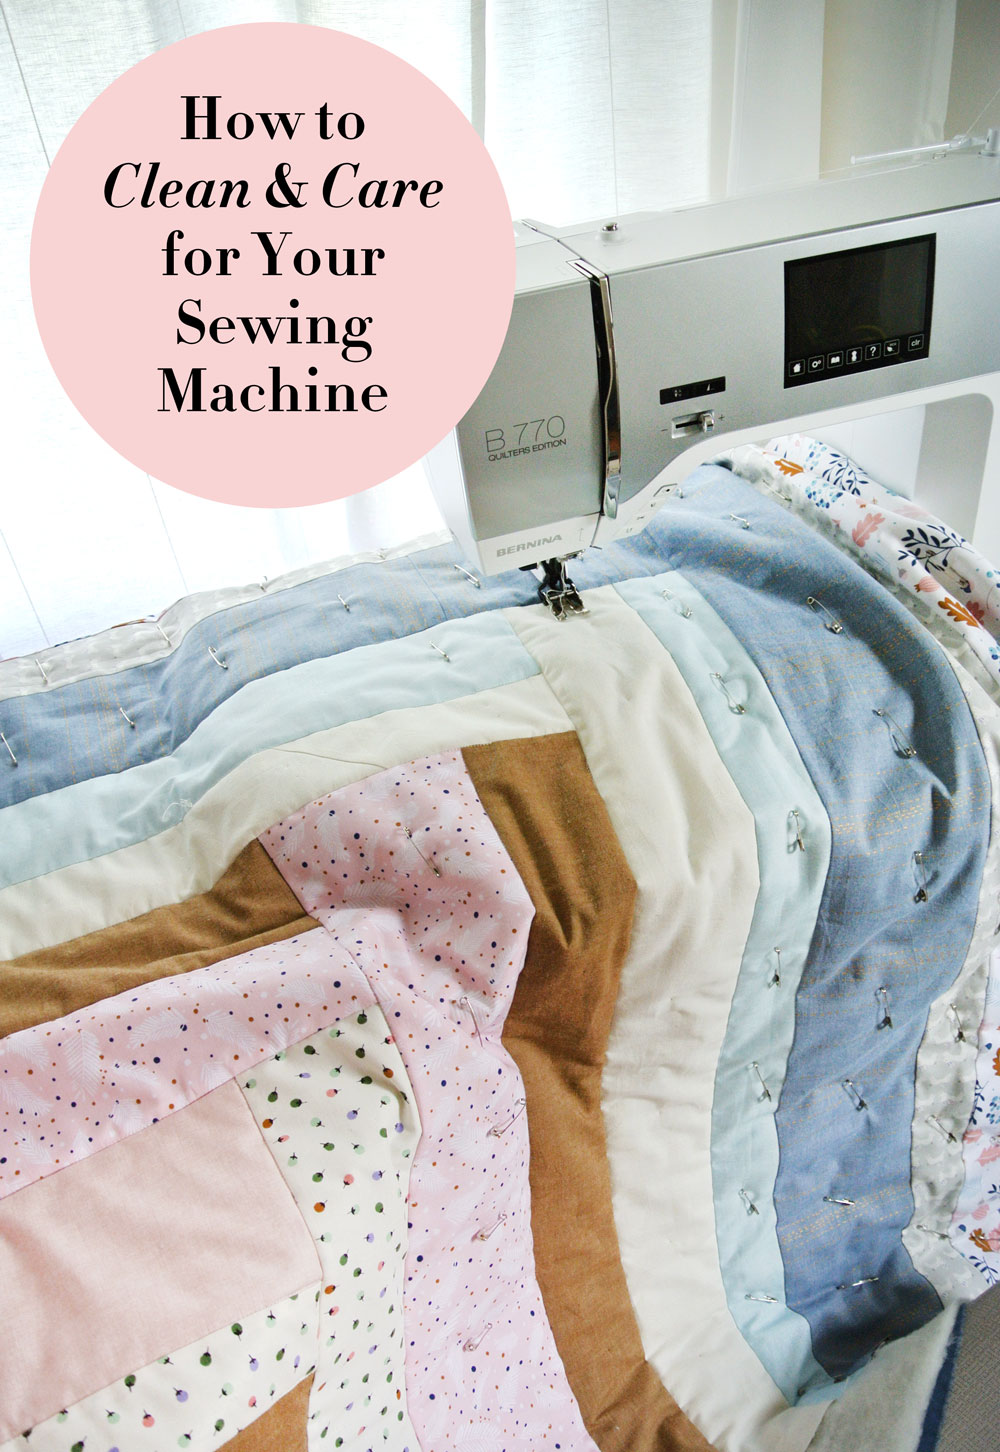 How-to-Clean-Sewing-Machine